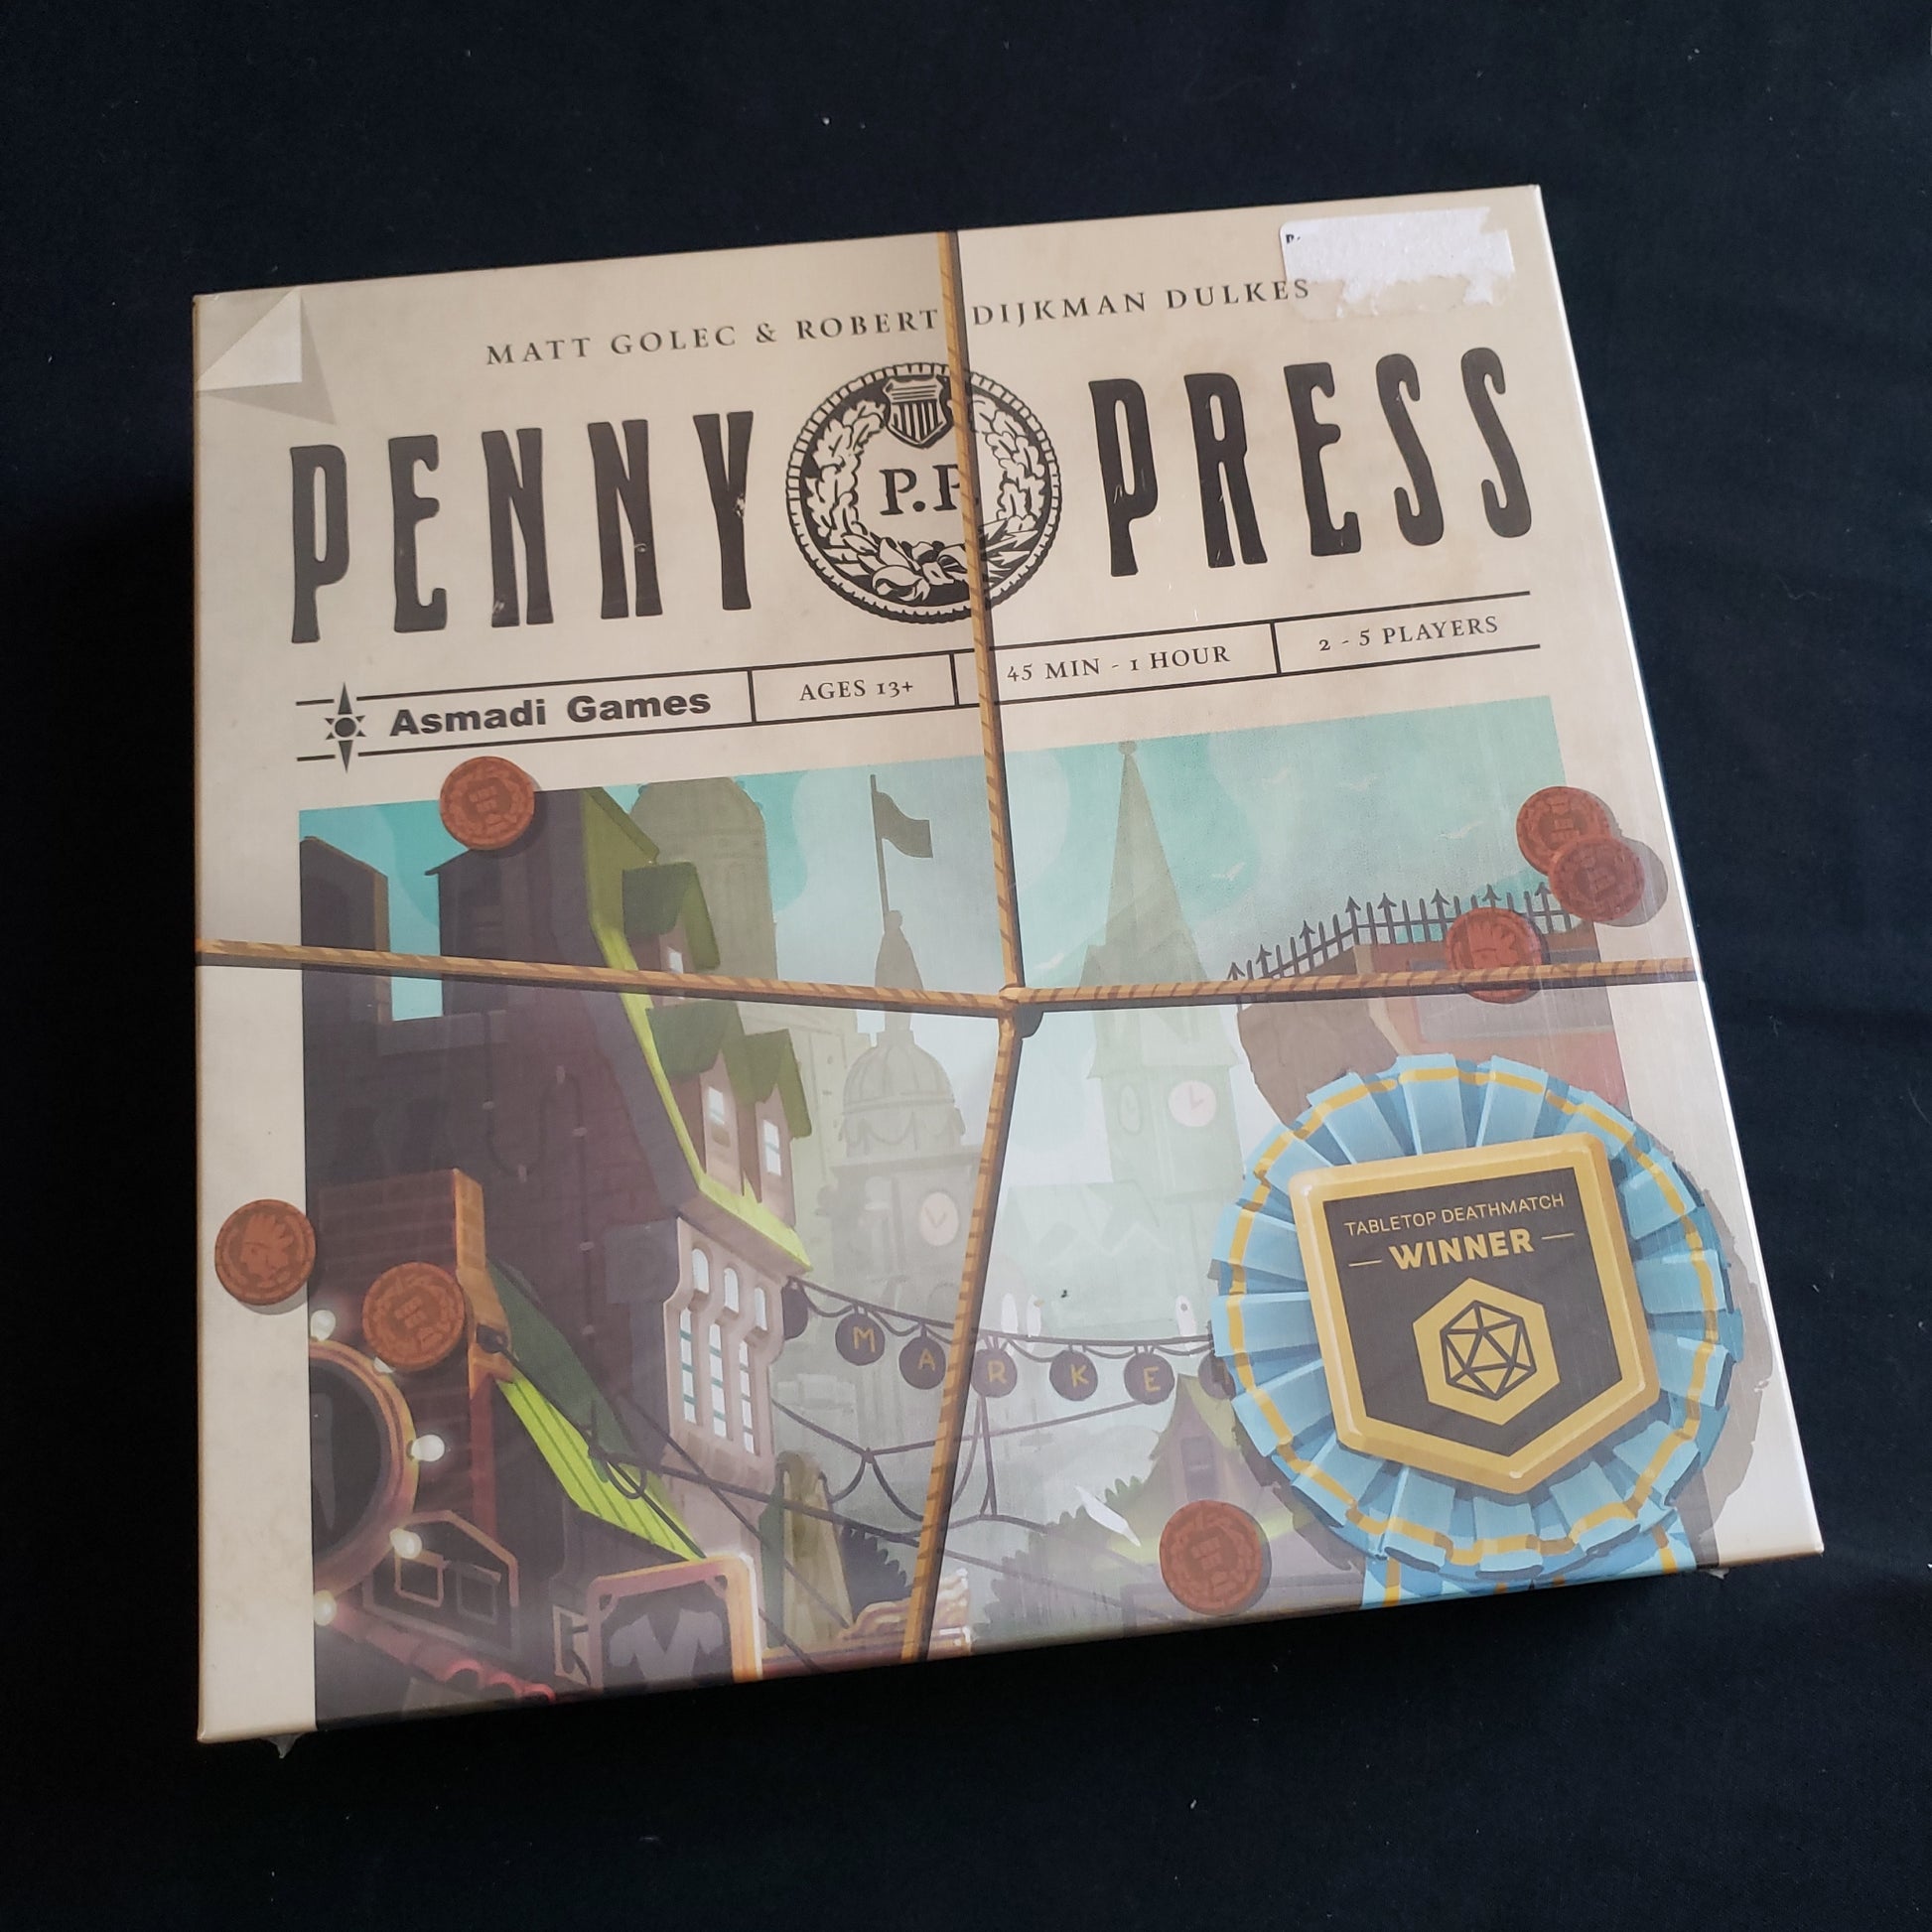 Image shows the front cover of the box of the Penny Press board game